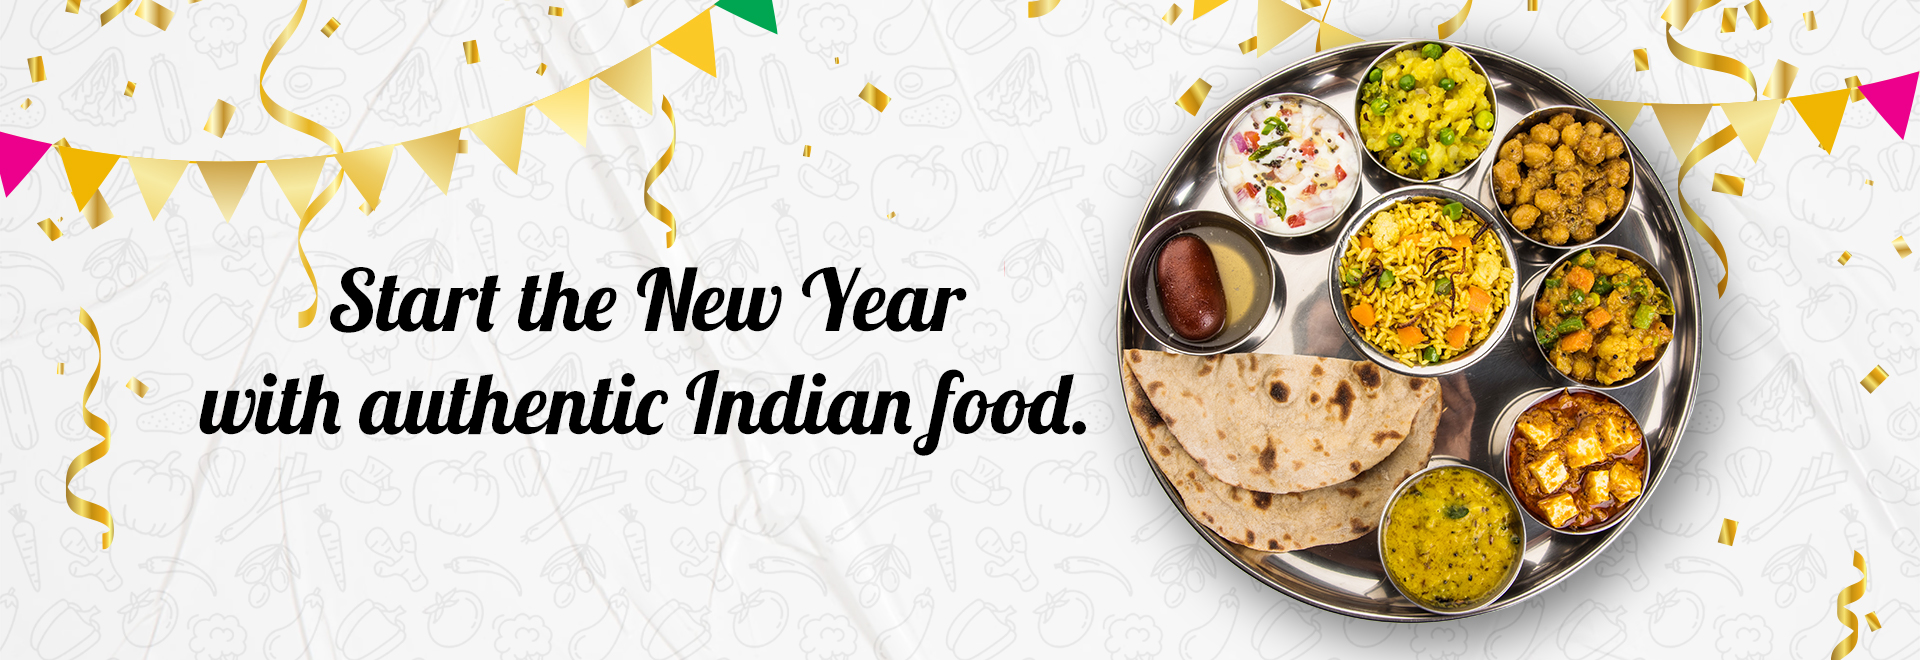 Start the New Year with Authentic Indian Food